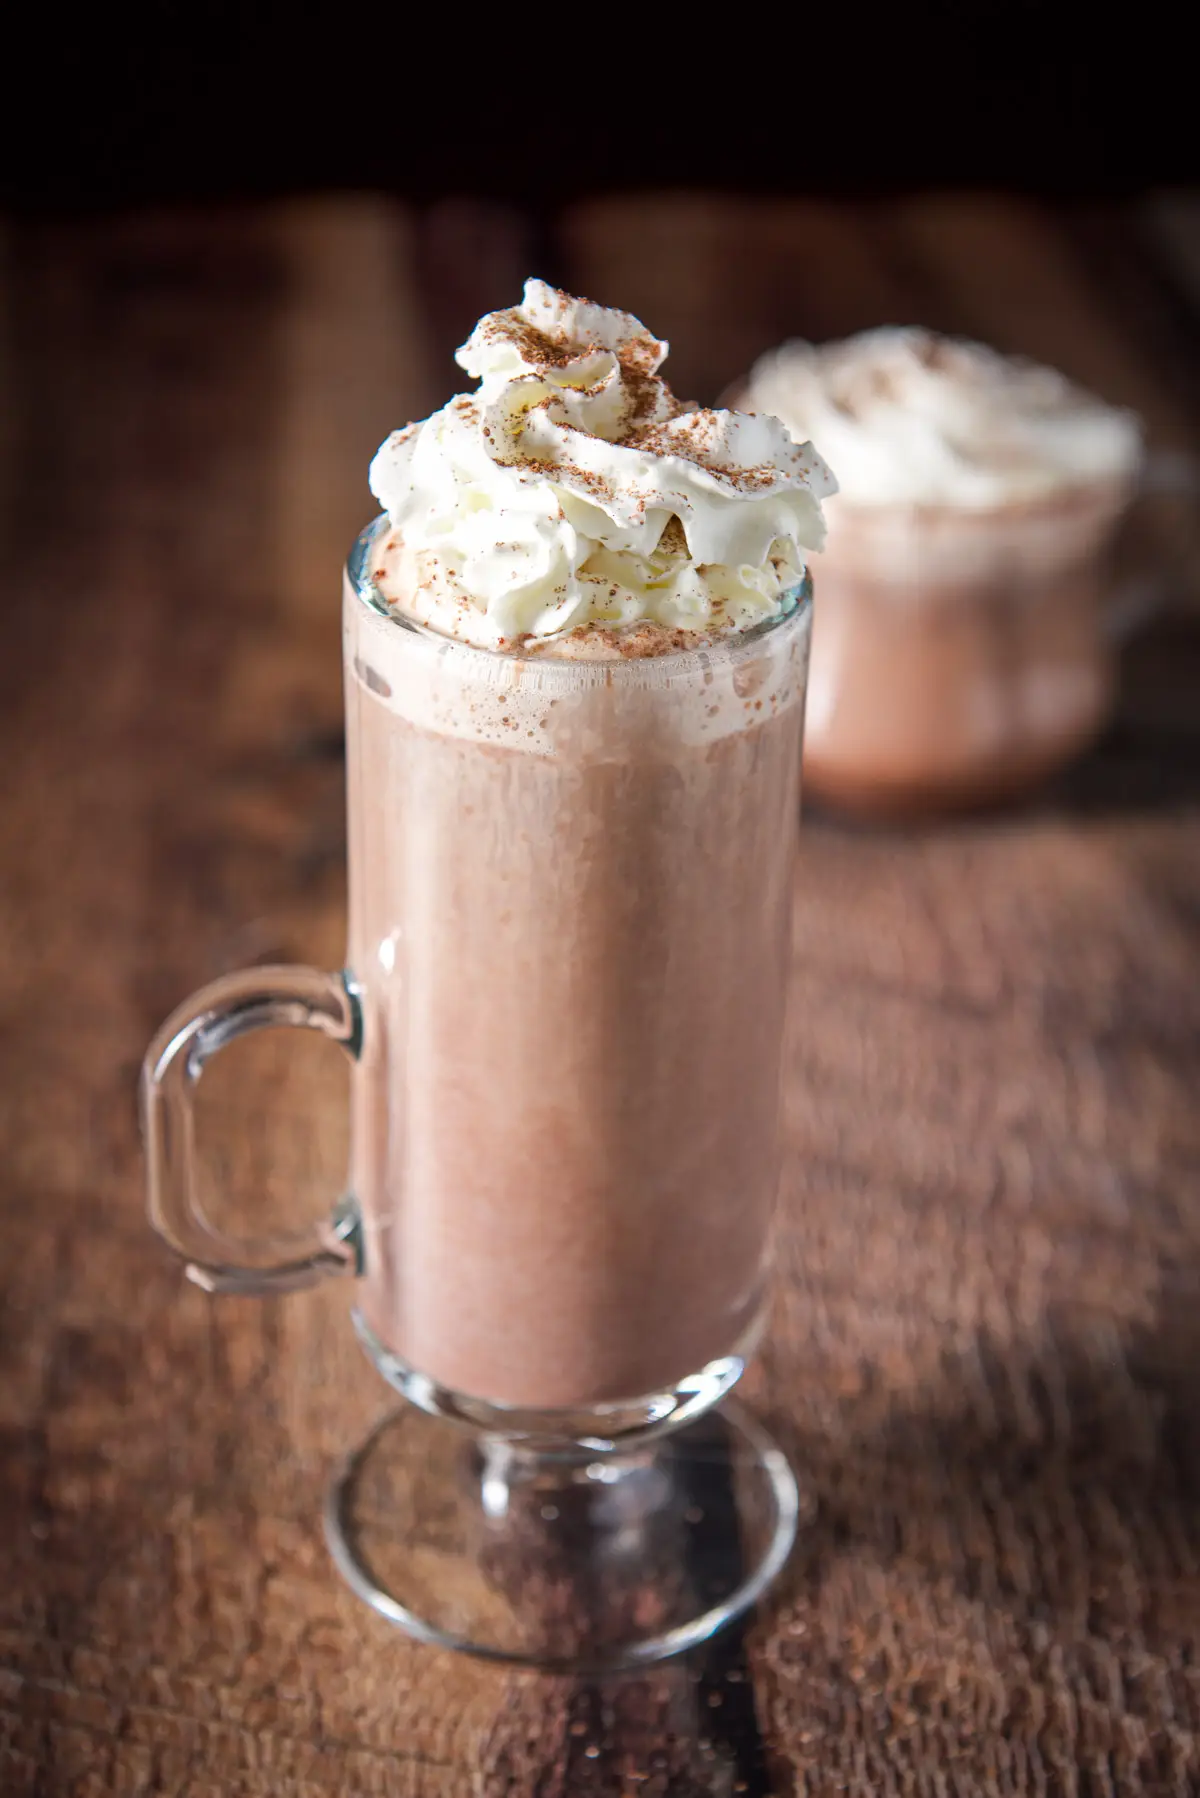 Two mugs with hot chocolate in them with whipped cream and sprinkled chocolate on top